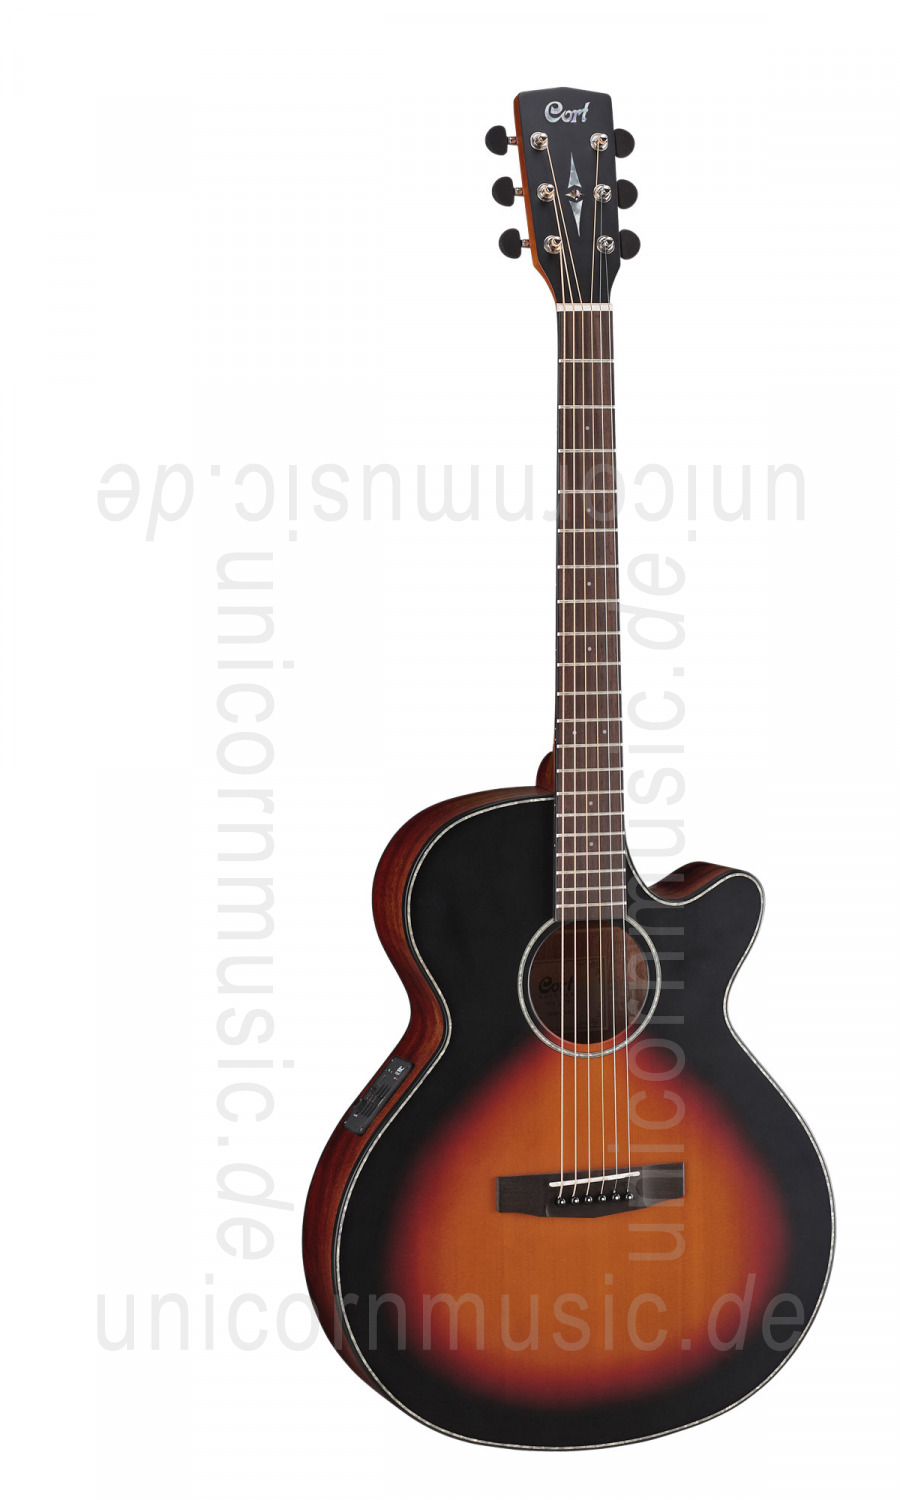 Acoustic Guitar CORT SFX E 3TSS - Super Folk - Pickup - Cutaway - solid  spruce top, Factory-new buy at , Guitars, Acoustic  Guitars, musical instruments, Steelstring Guitars, Acoustic Guitars, WG-SFX -E-3TSS